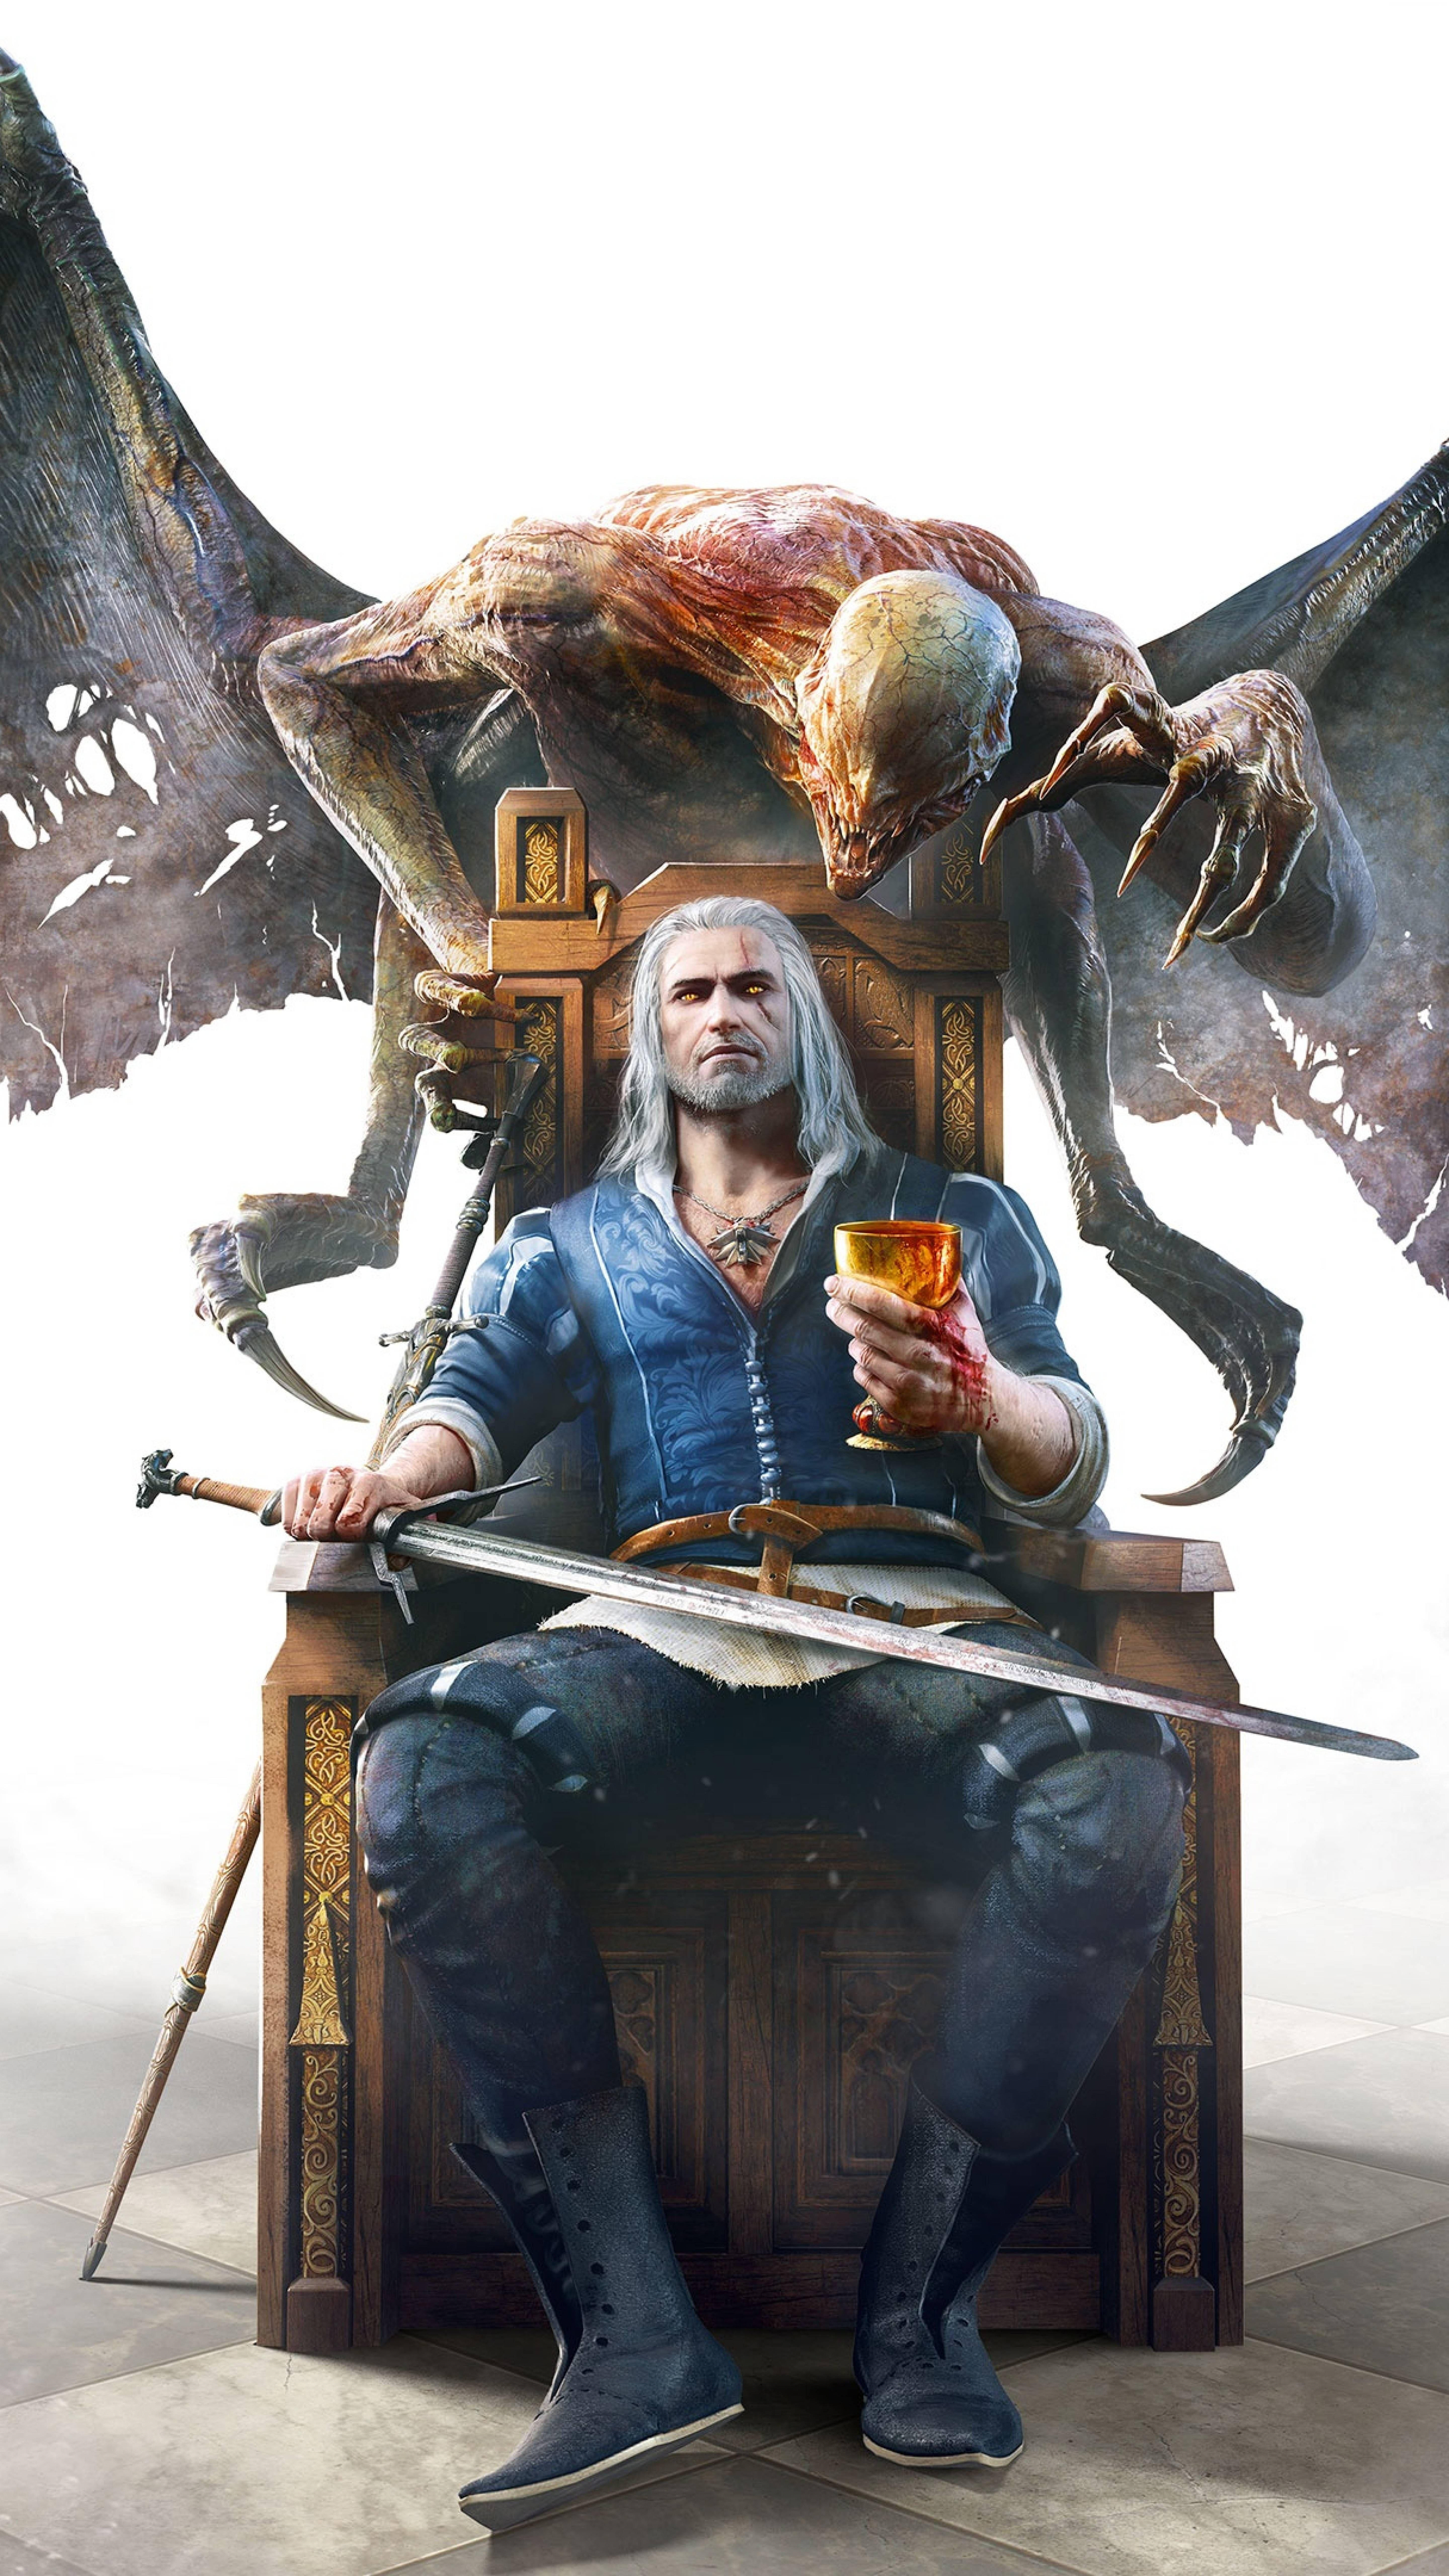 1080p and some 4k wallpaper for phones. The witcher The witcher, The witcher wild hunt